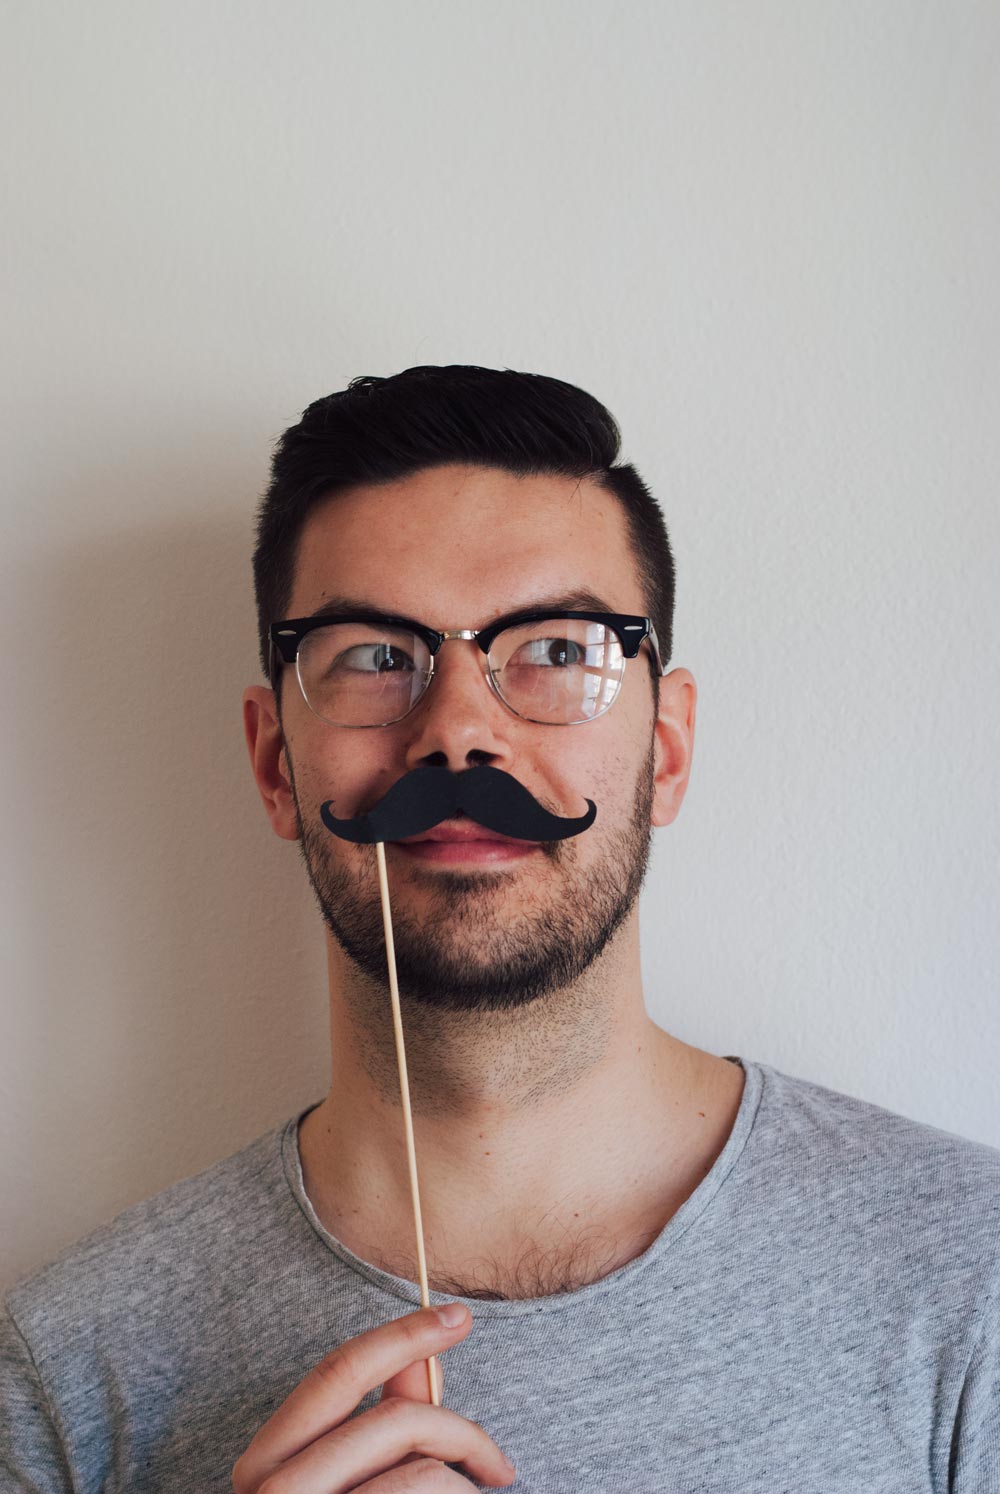 Best 5 Movember styling ideas: Glasses 